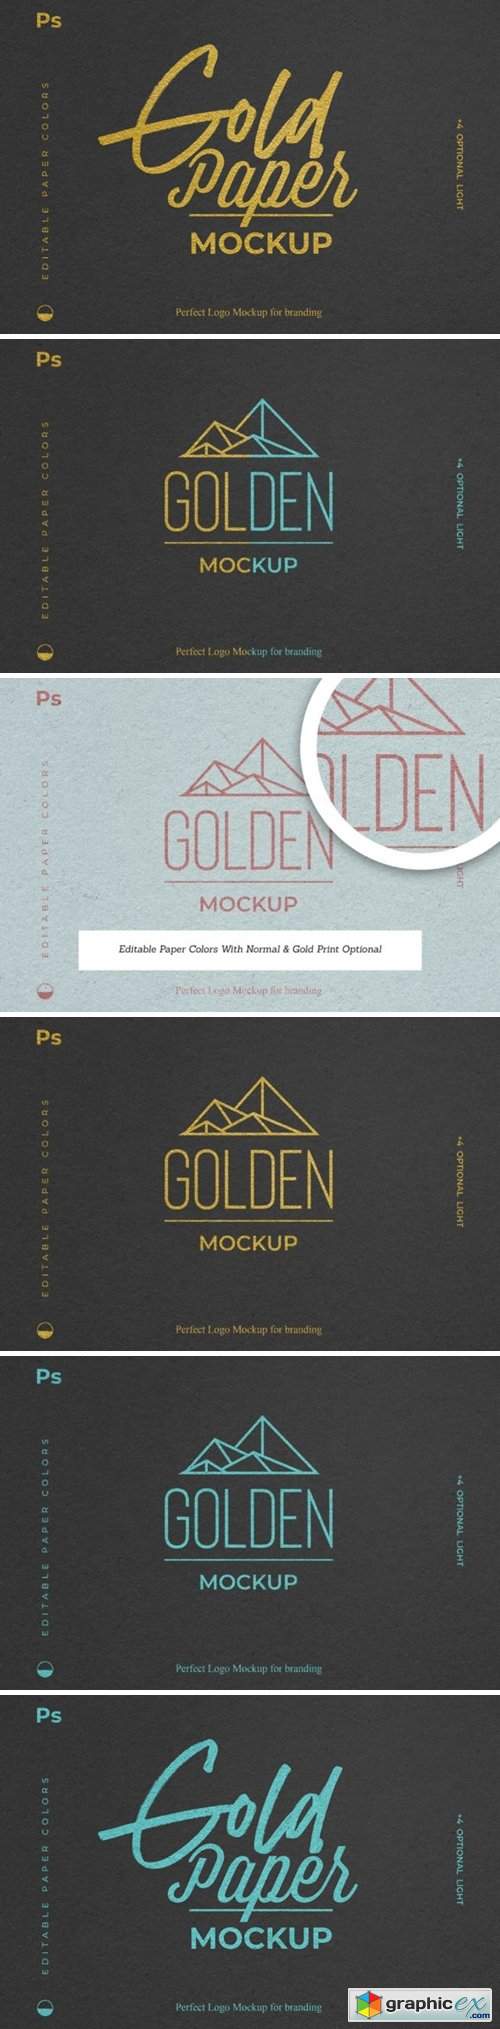 Download Gold Foil Paper Logo Mockup » Free Download Vector Stock Image Photoshop Icon